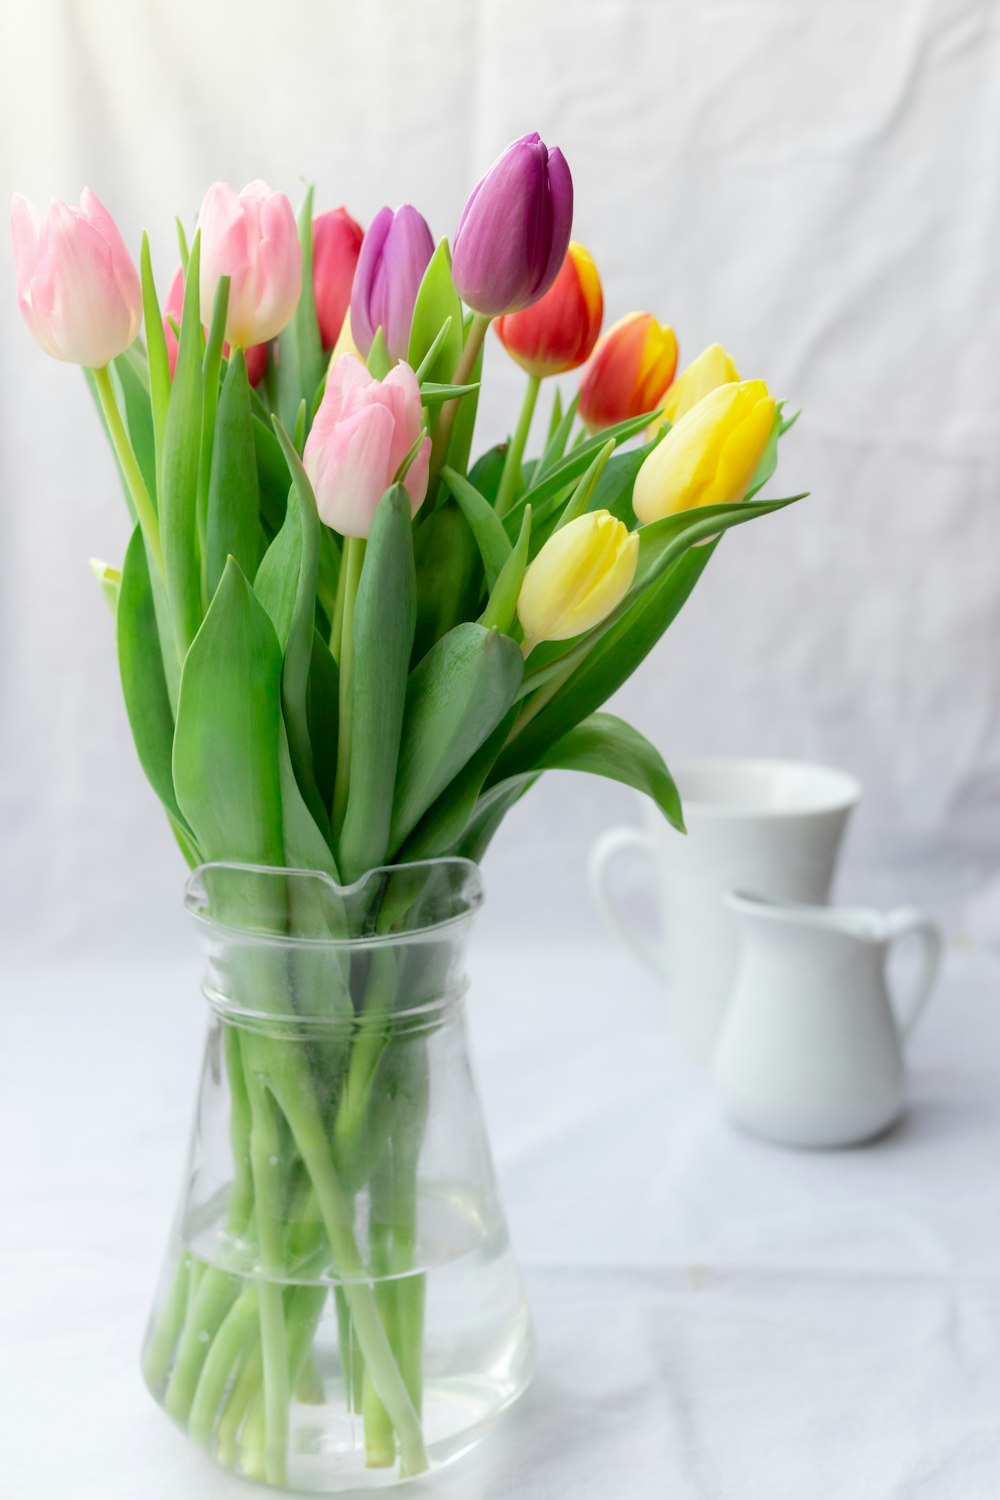 Pink and yellow tulips in clear glass vase photo – Free Flower Image on  Unsplash